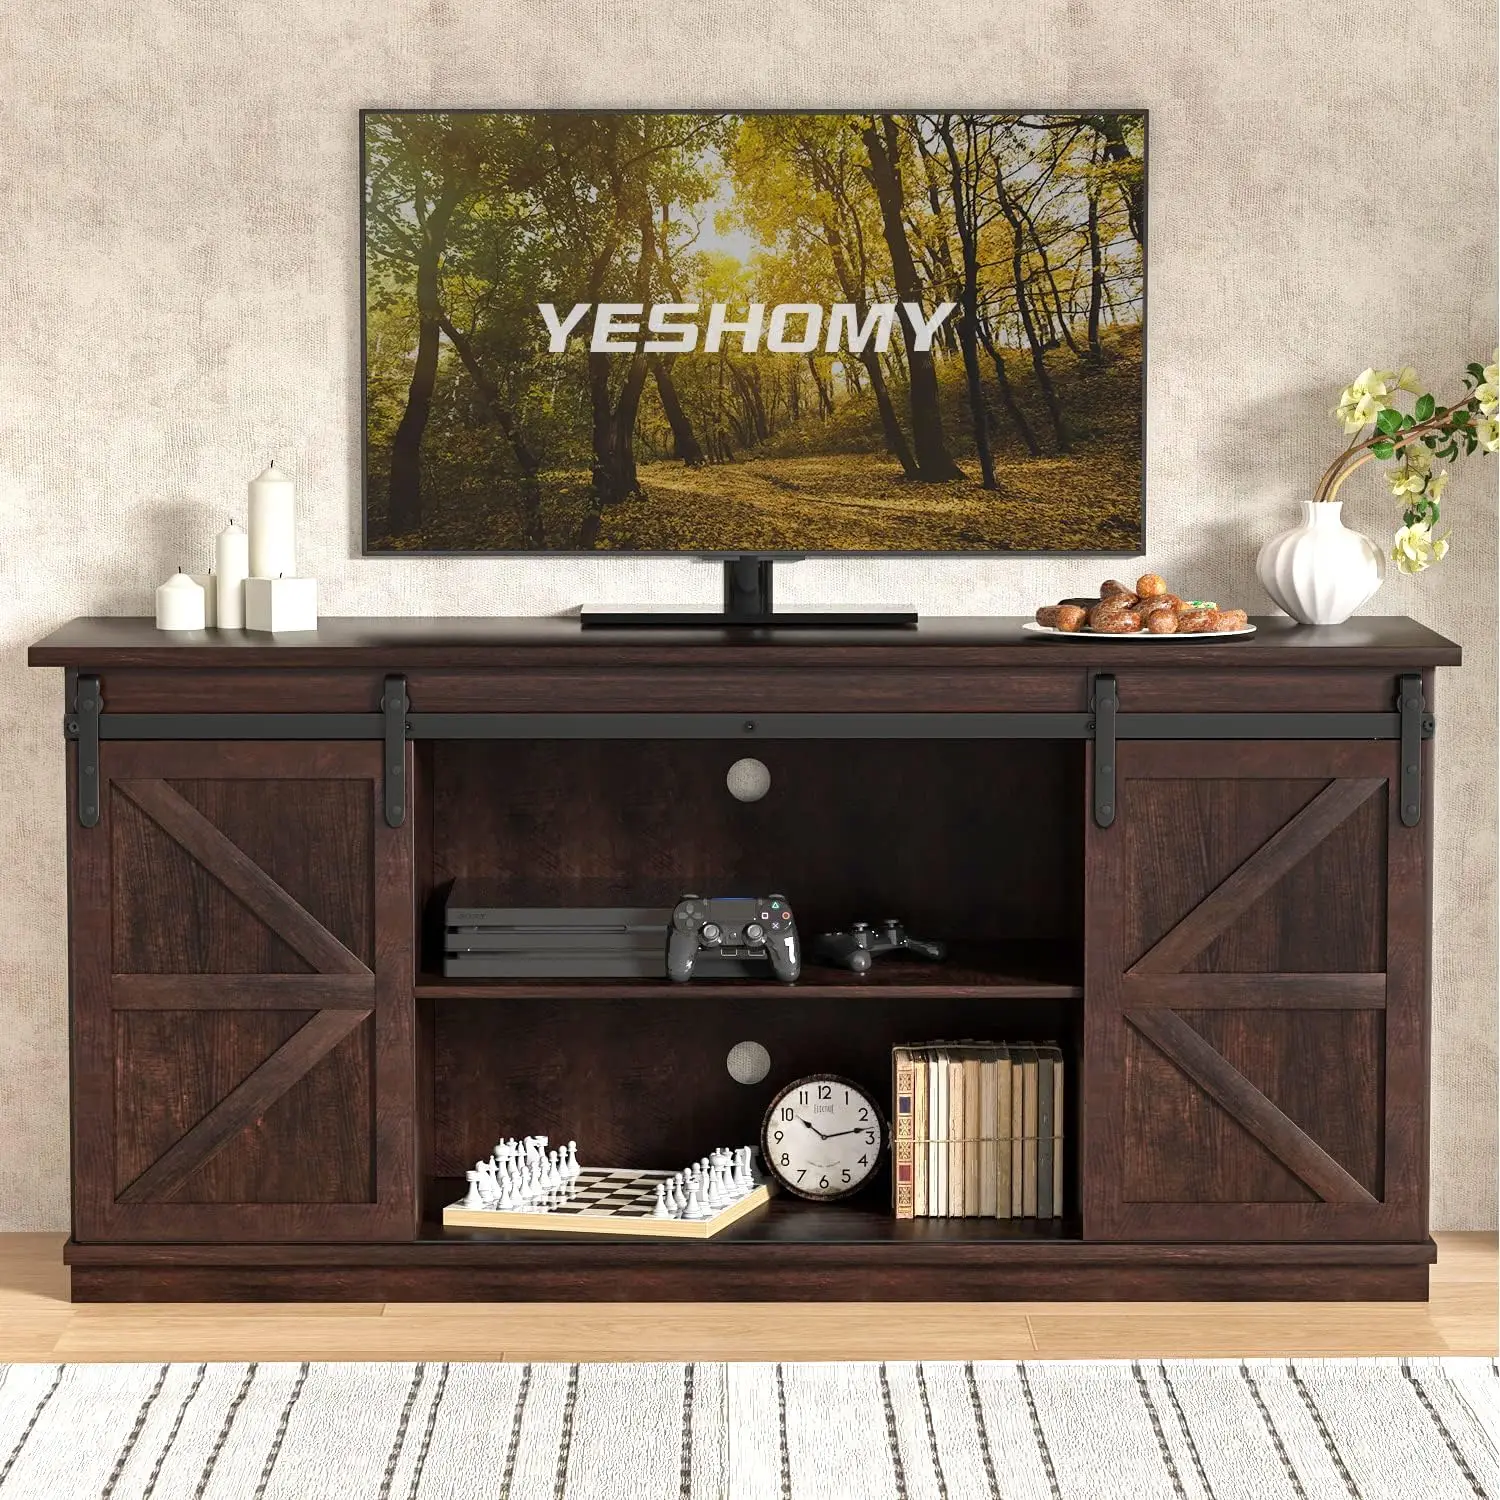 

TV Stand for Televisions up to 65 Inchs, with Sliding Barn Doors and Storage Cabinets, Console Table, 58 Inch, Espresso